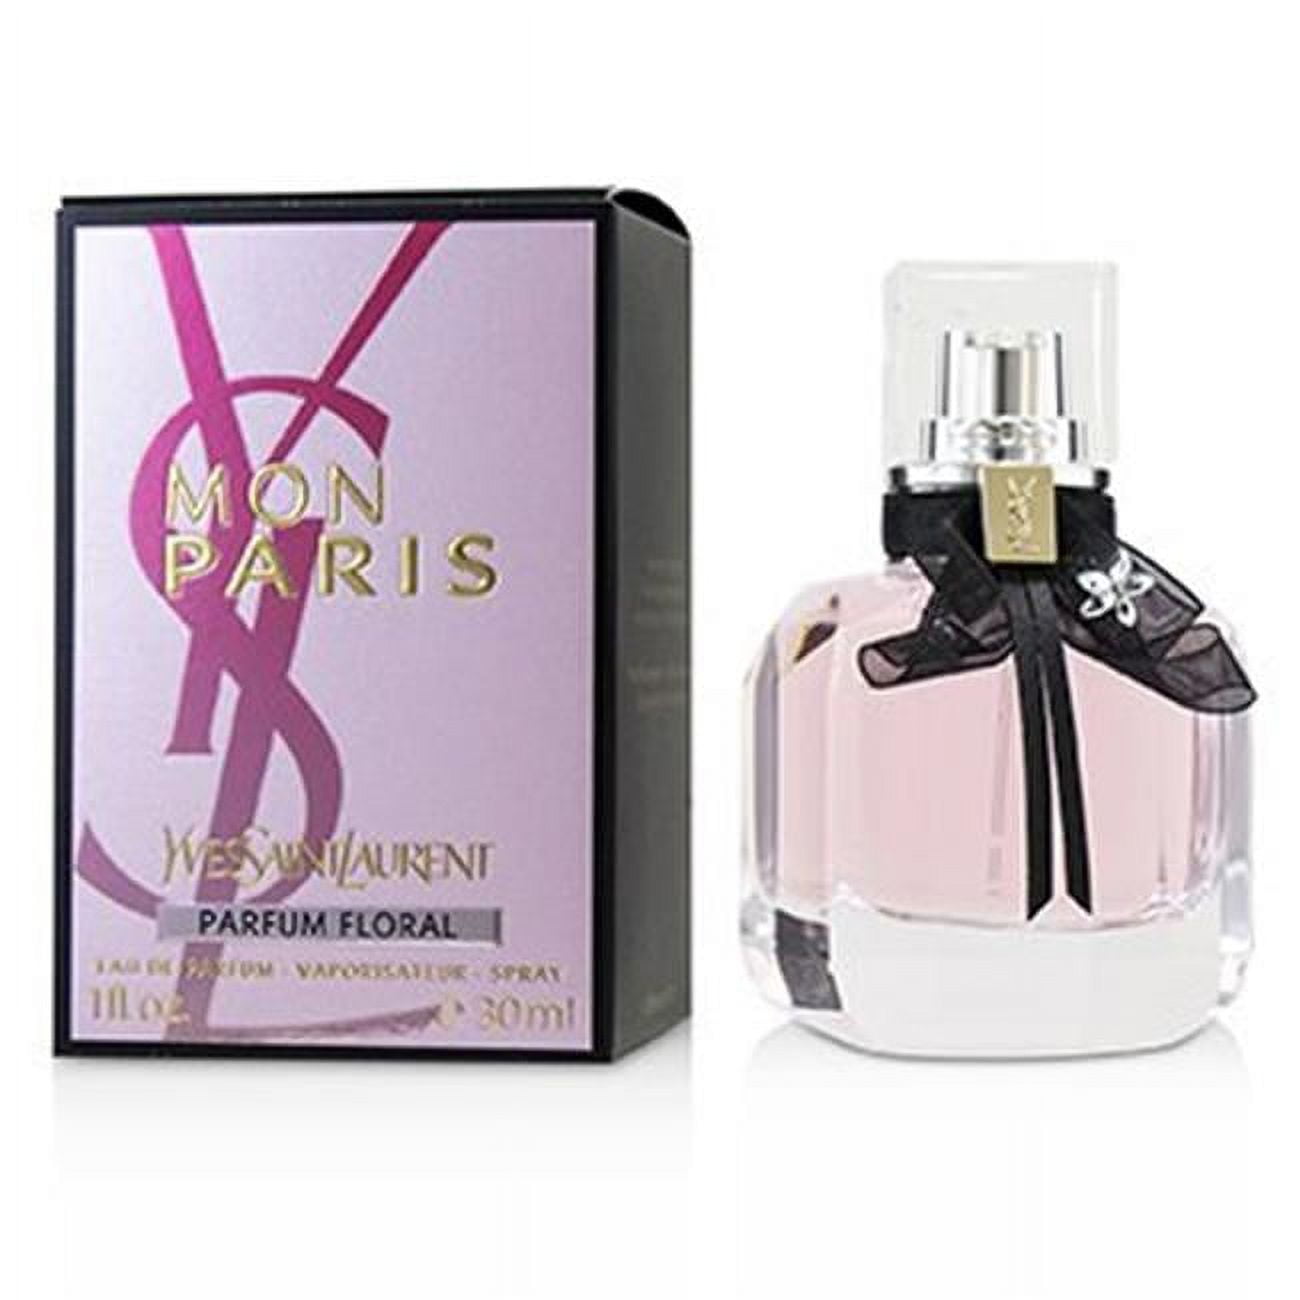  Regal Fragrances Lueur Paris Womens Perfume - Inspired by the  Scent of the YSL'S Mon Paris Perfume for Women - Floral Fruity snd Sweet  Chypre Scent, 3.4 Fl Oz (100